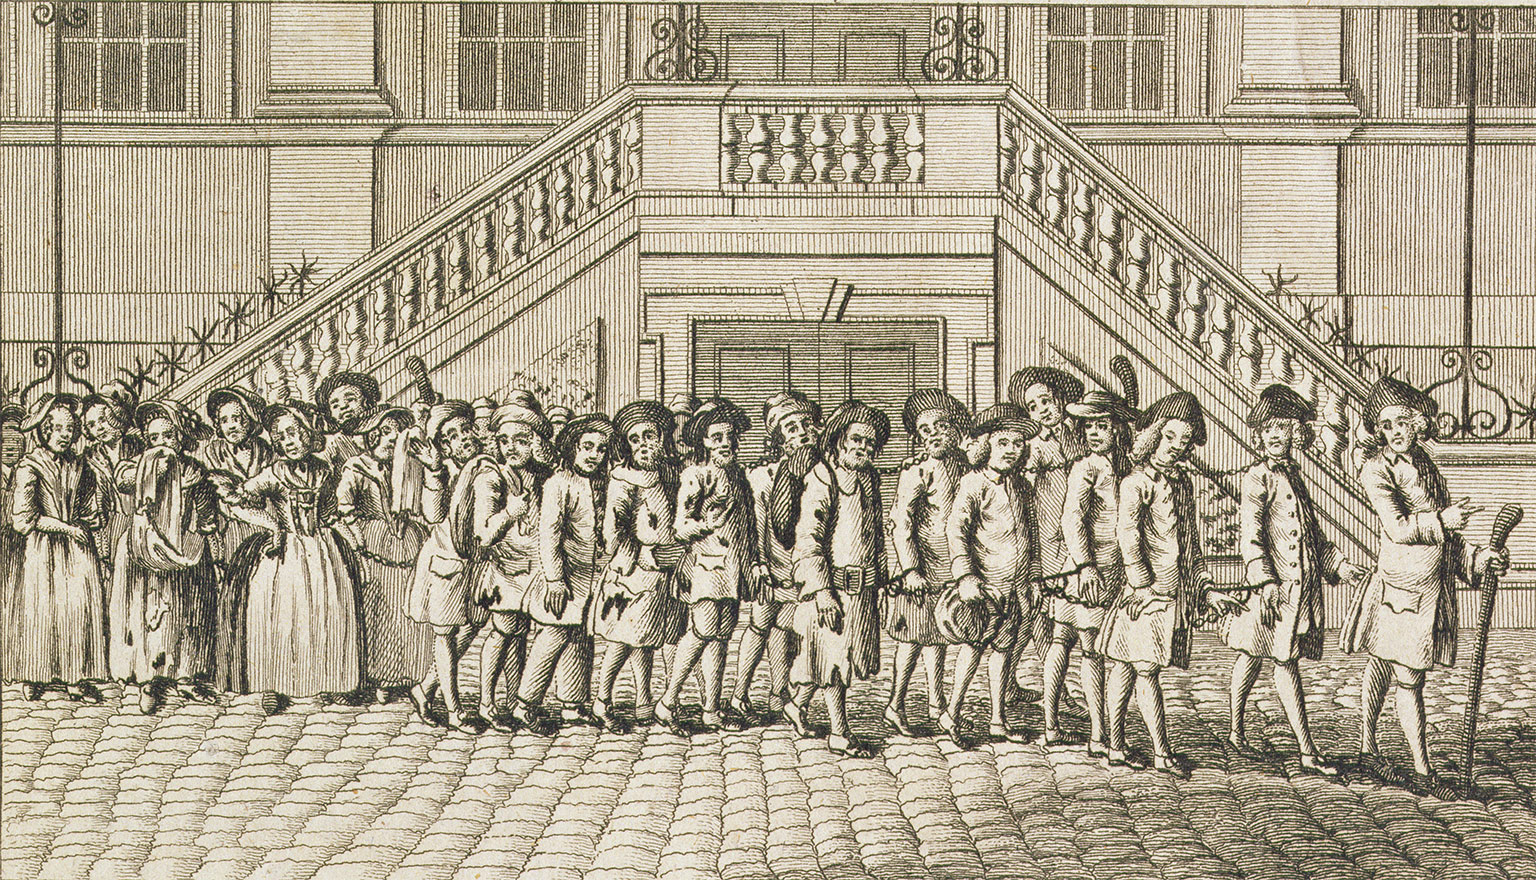 Convicts from Newgate Prison being taken for transportation, c.1760